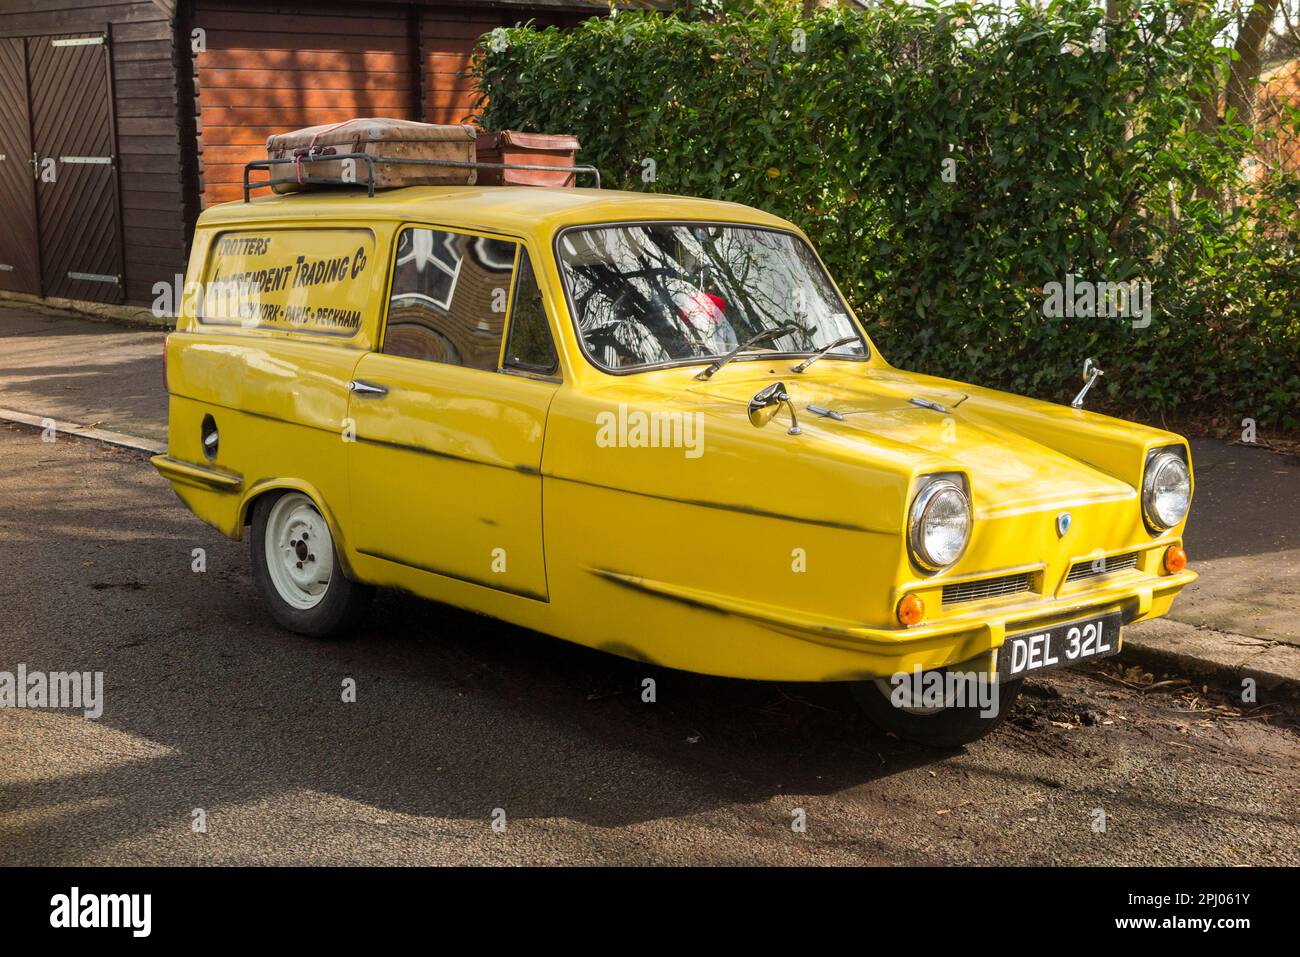 Tribute classic car 'copy' of Del Boy's Reliant Regal (1968 model in the TV series) yellow van from Only Fools and Horses television programme. (133) Stock Photo